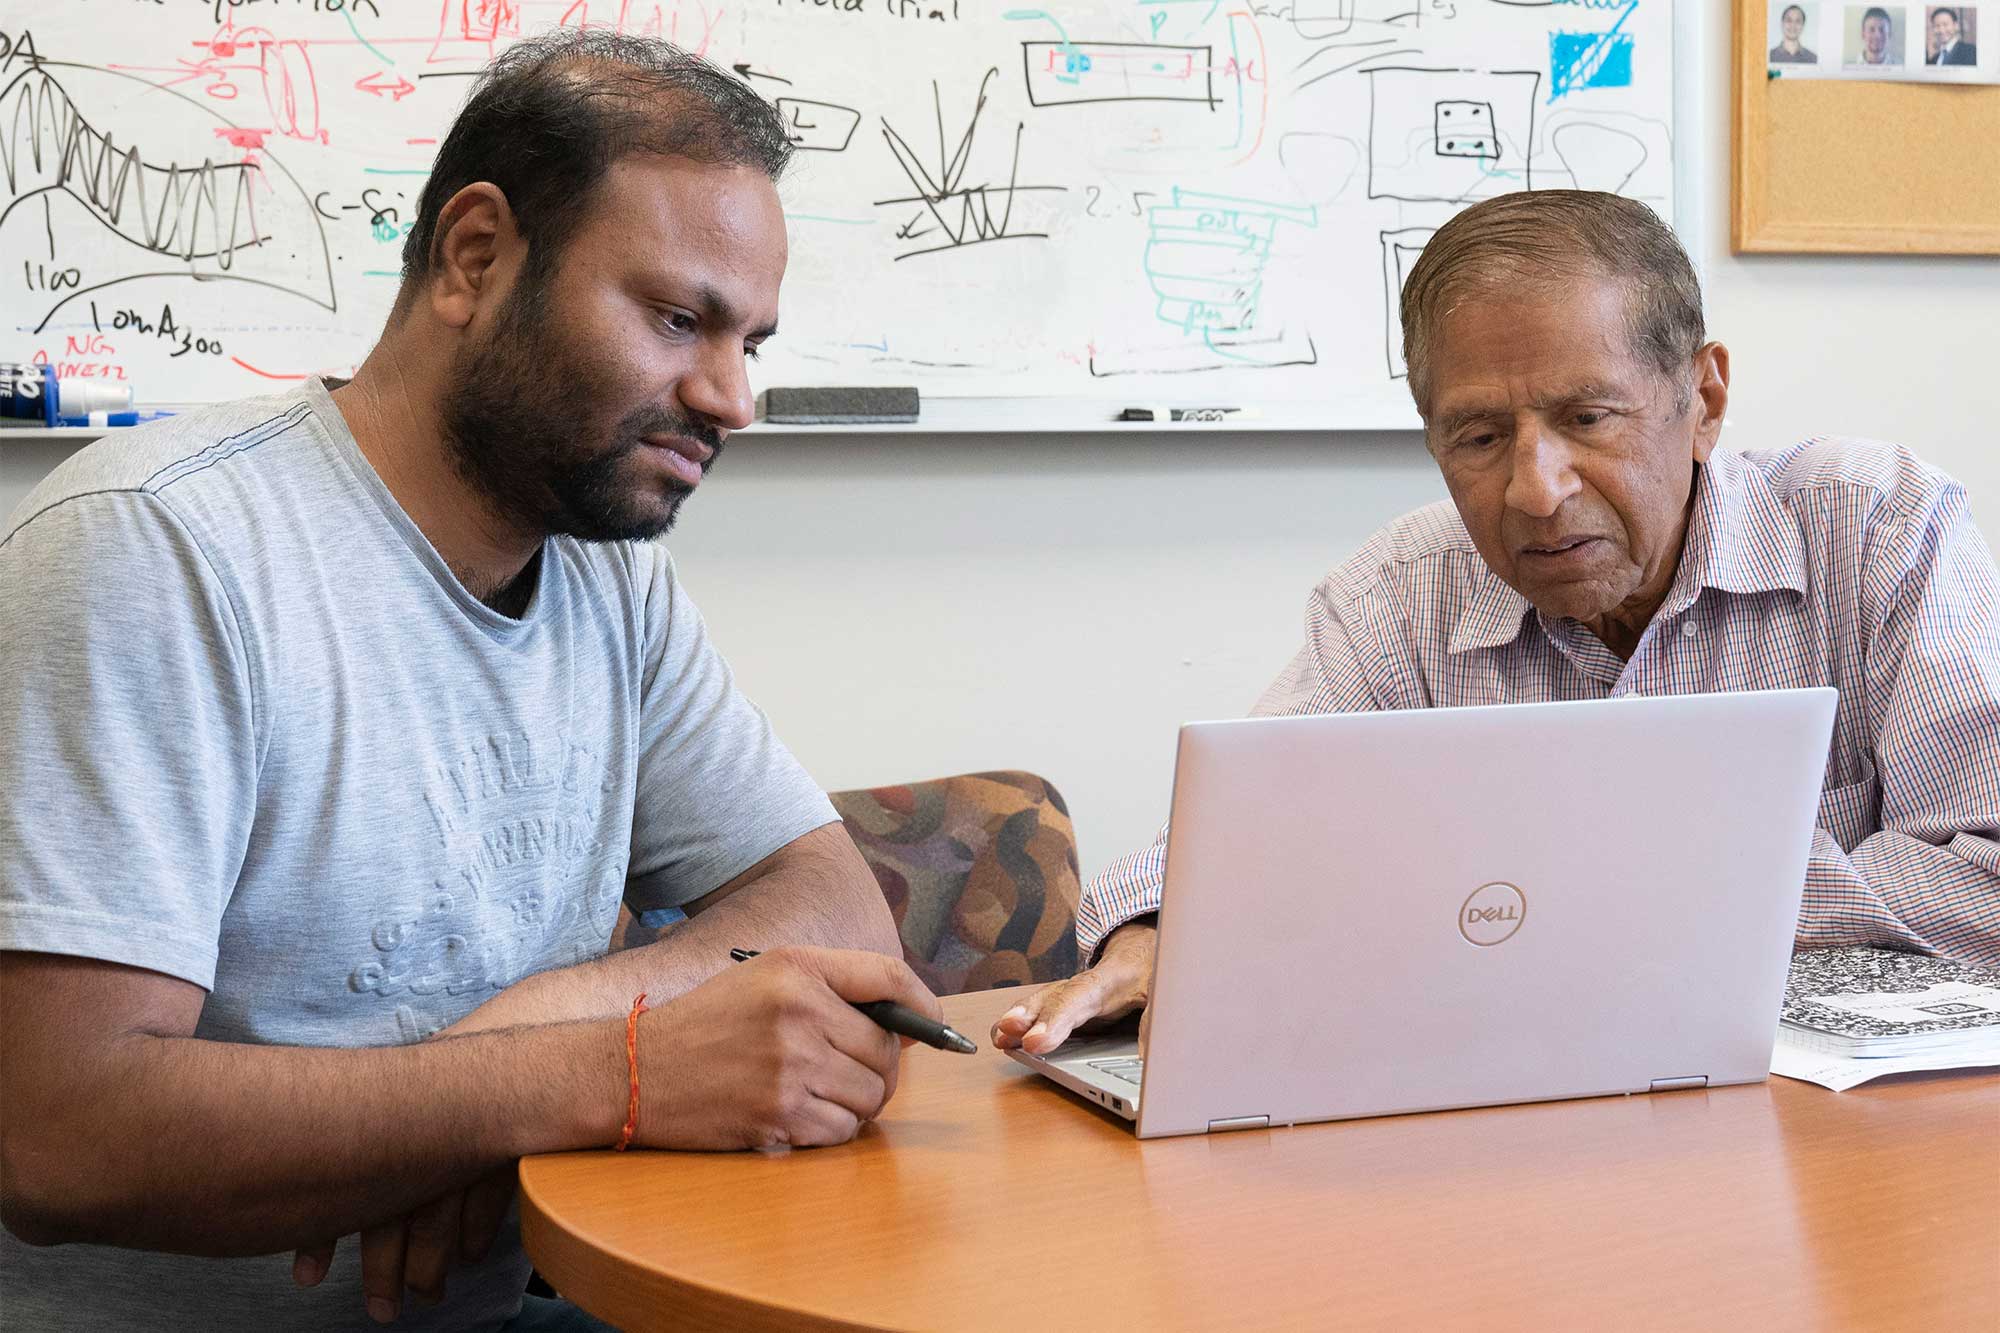 In front of a whiteboard covered in hand-drawn schematics, Kanaujia and Gupta sit at a desk looking at a laptop together